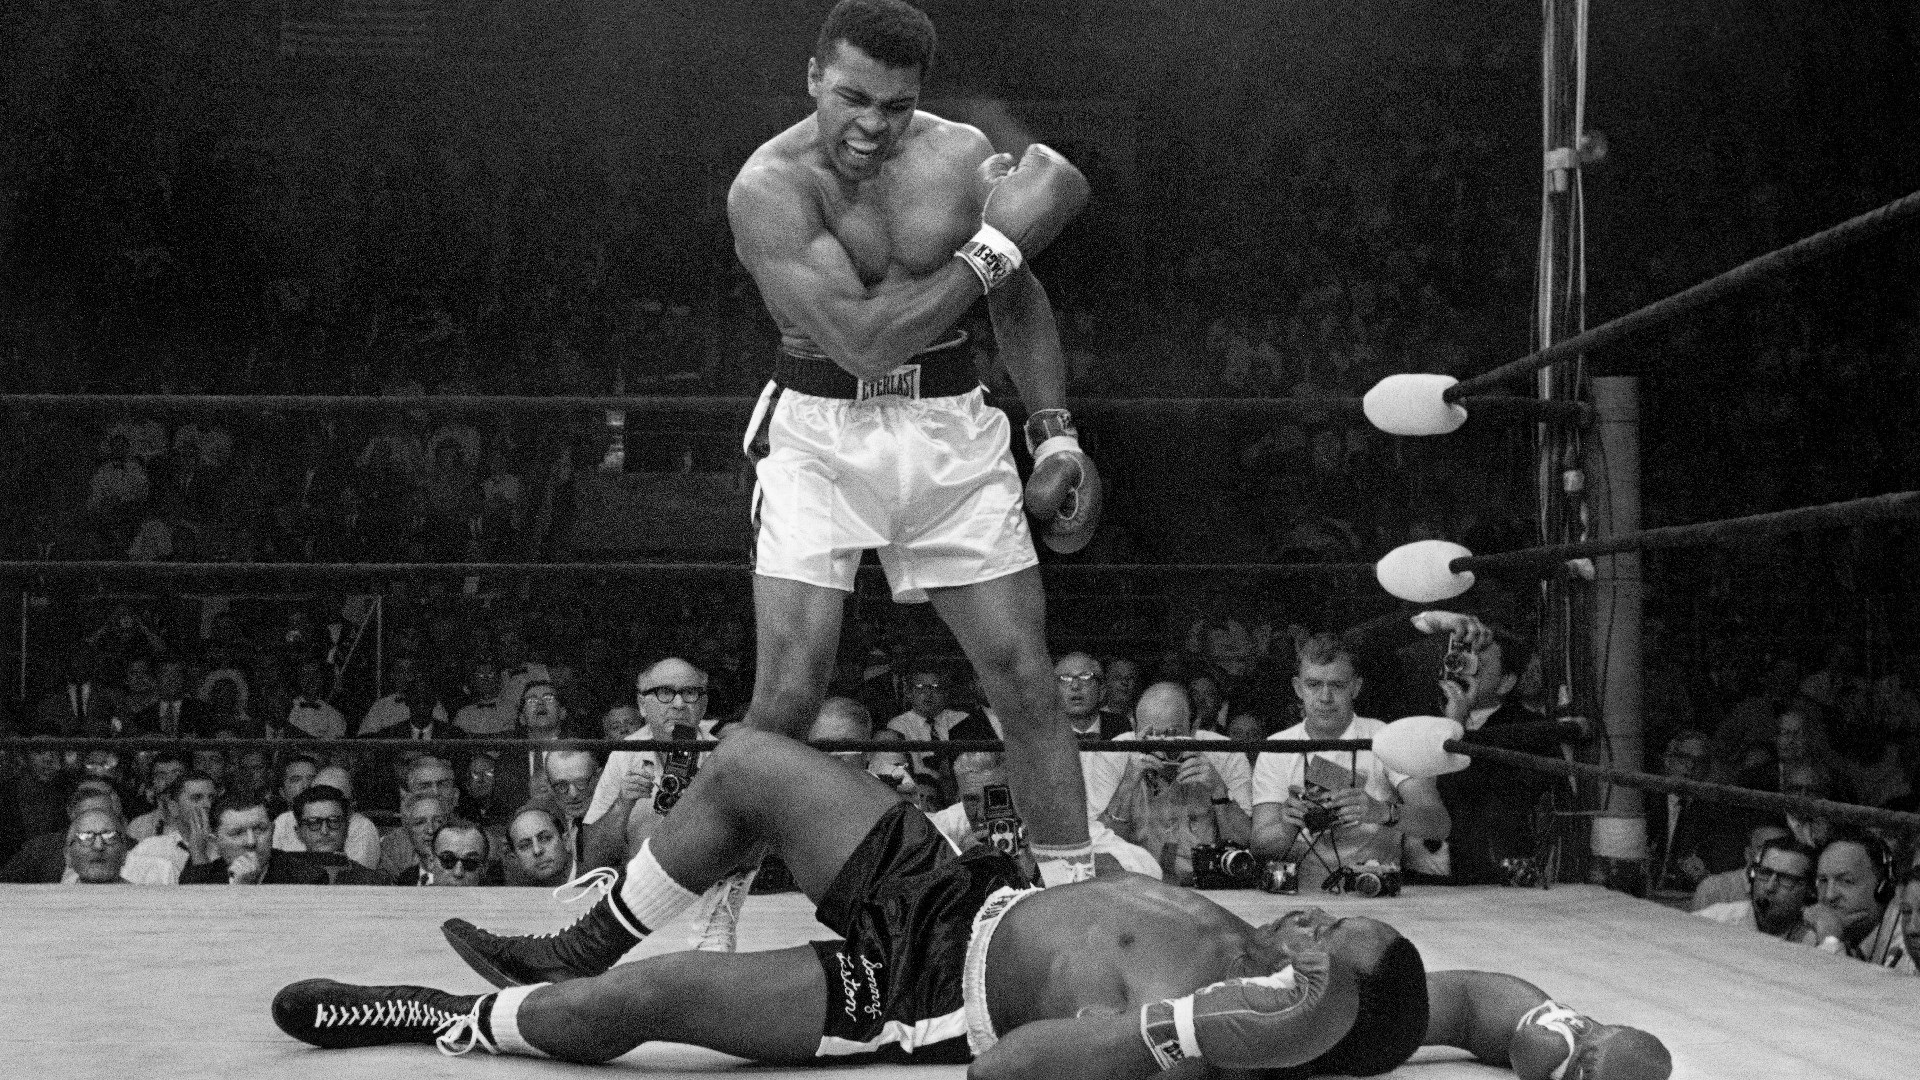 It would turn out to be the only world championship boxing match ever fought in Maine. Ali's opponent, Sonny Liston, was out for the count within two minutes.